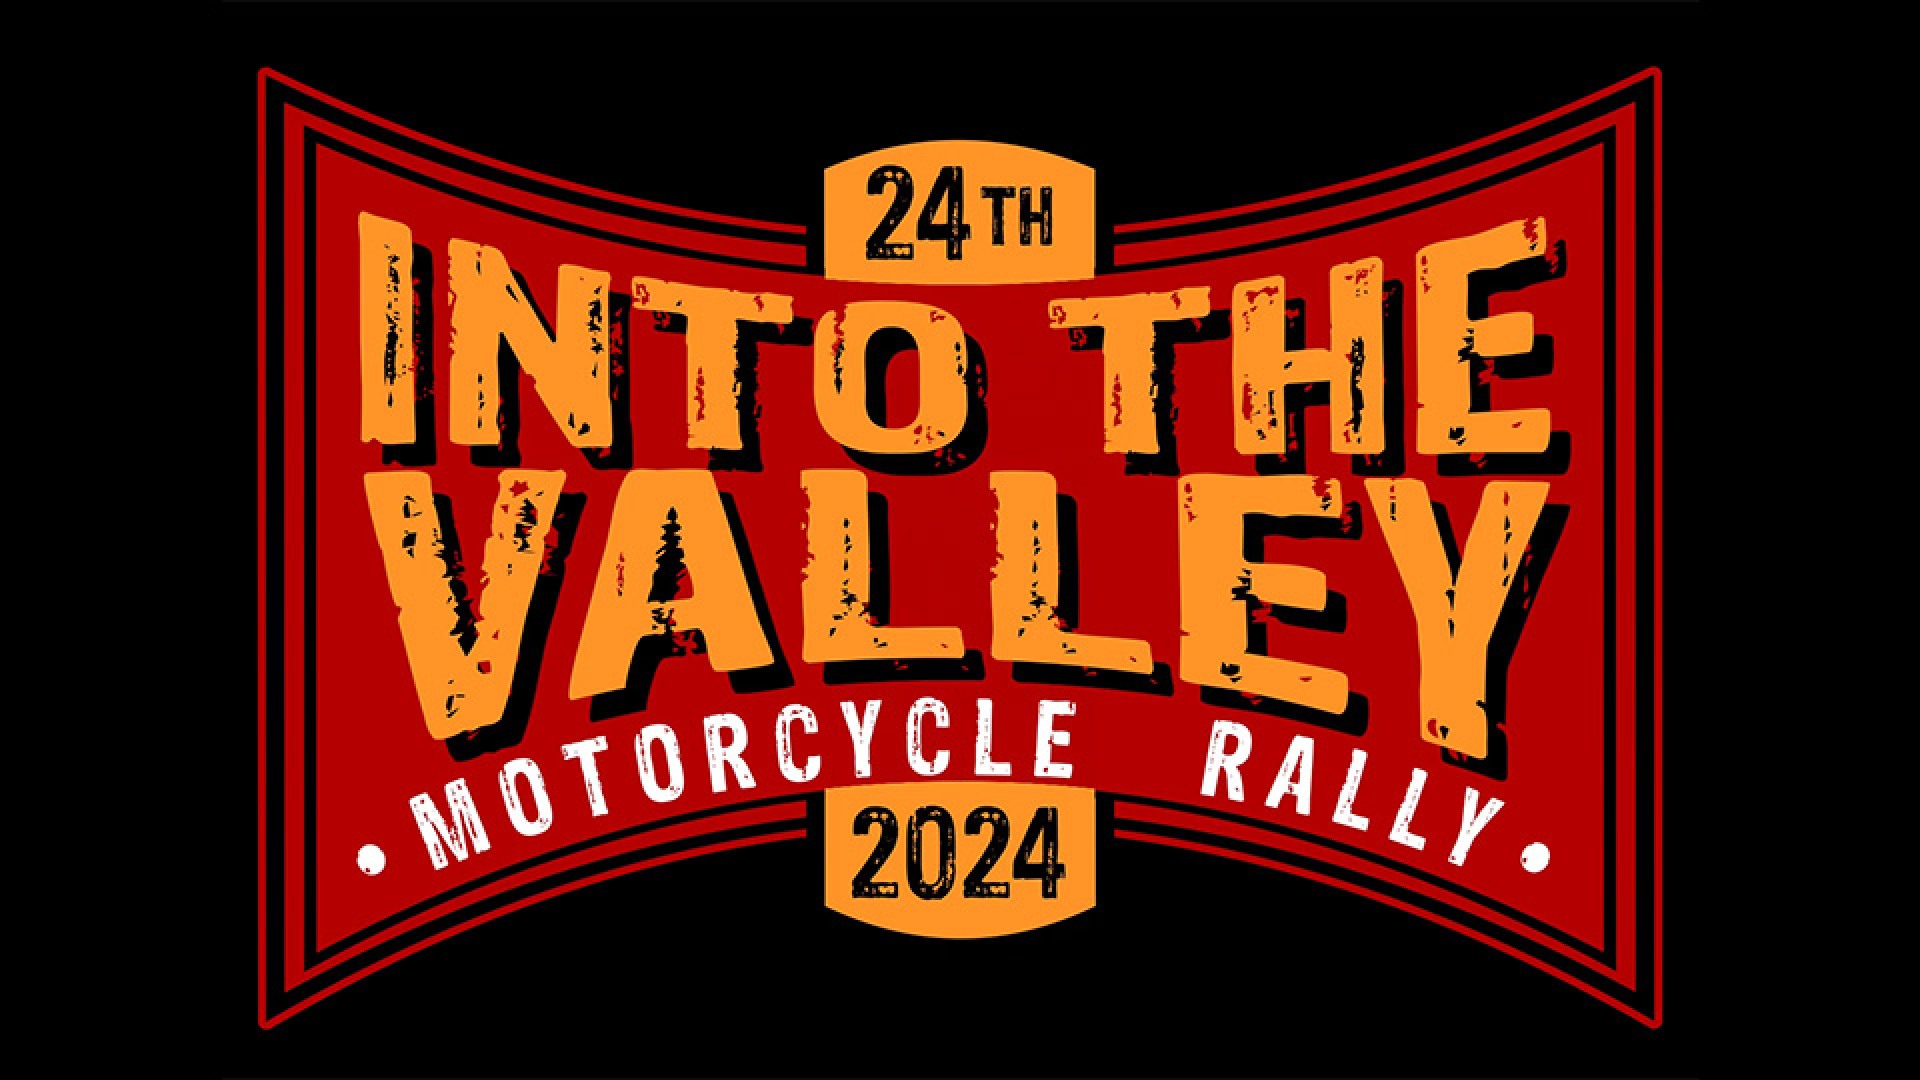 https://www.raceleathers.co.uk/image/cache/catalog/Blog%20Images/Into%20The%20Valley%20Motorcycle%20Rally-1920x1080.jpg